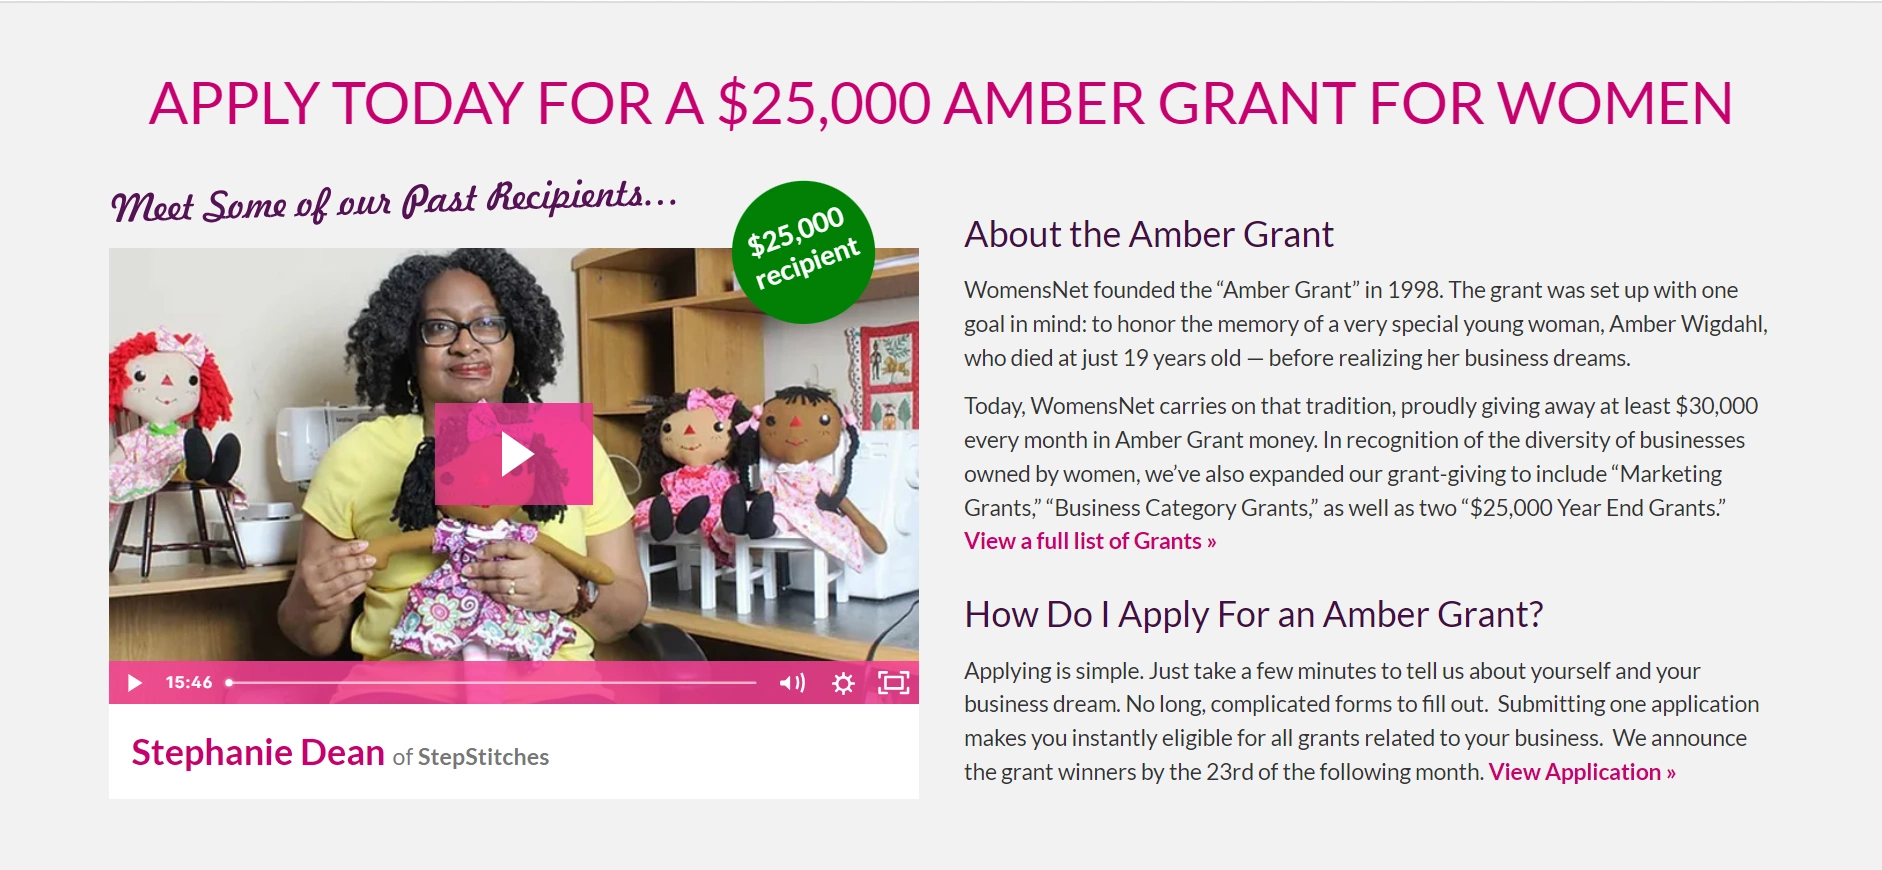 Amber Grant homepage - Small business grants for women